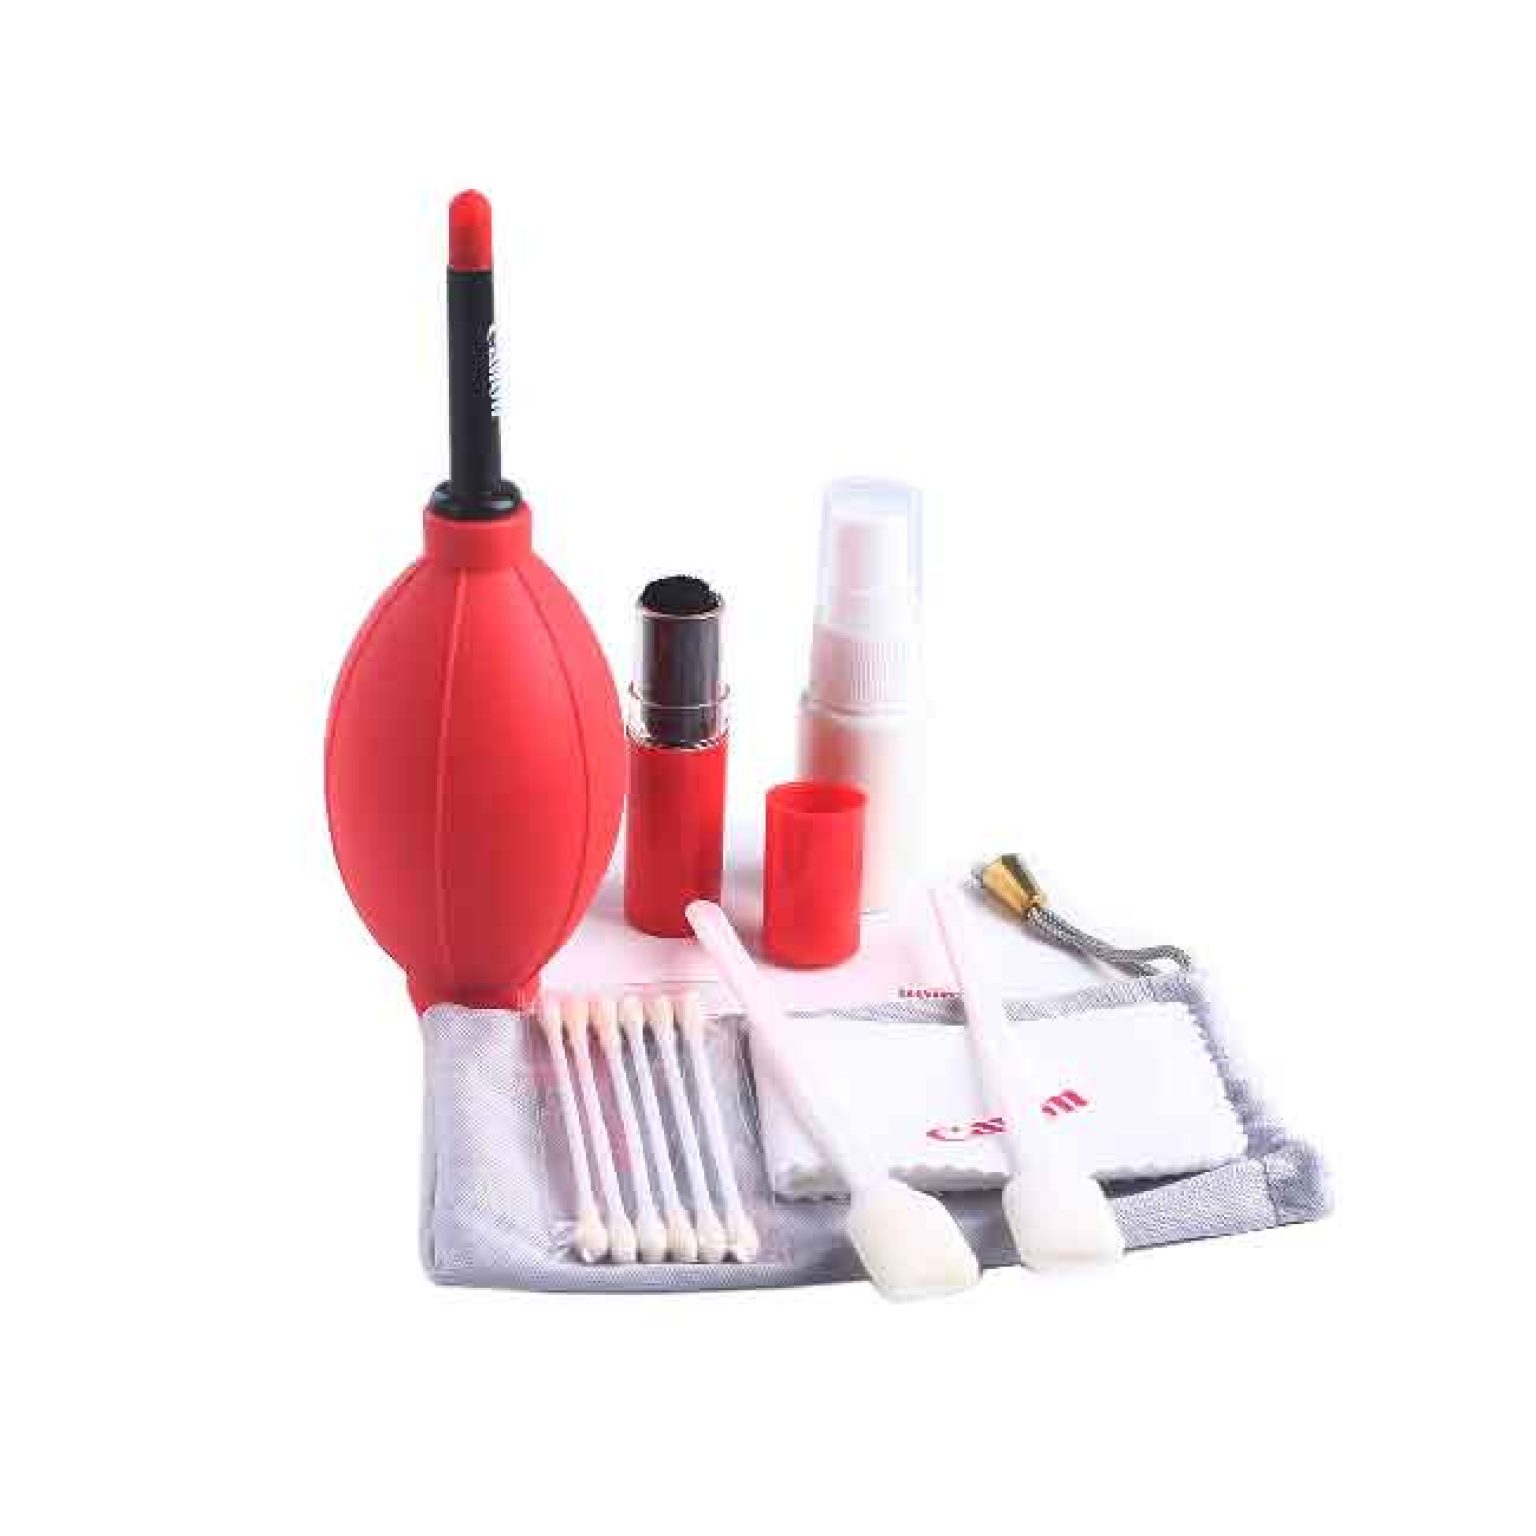 Canon Lens Cleaning Kit